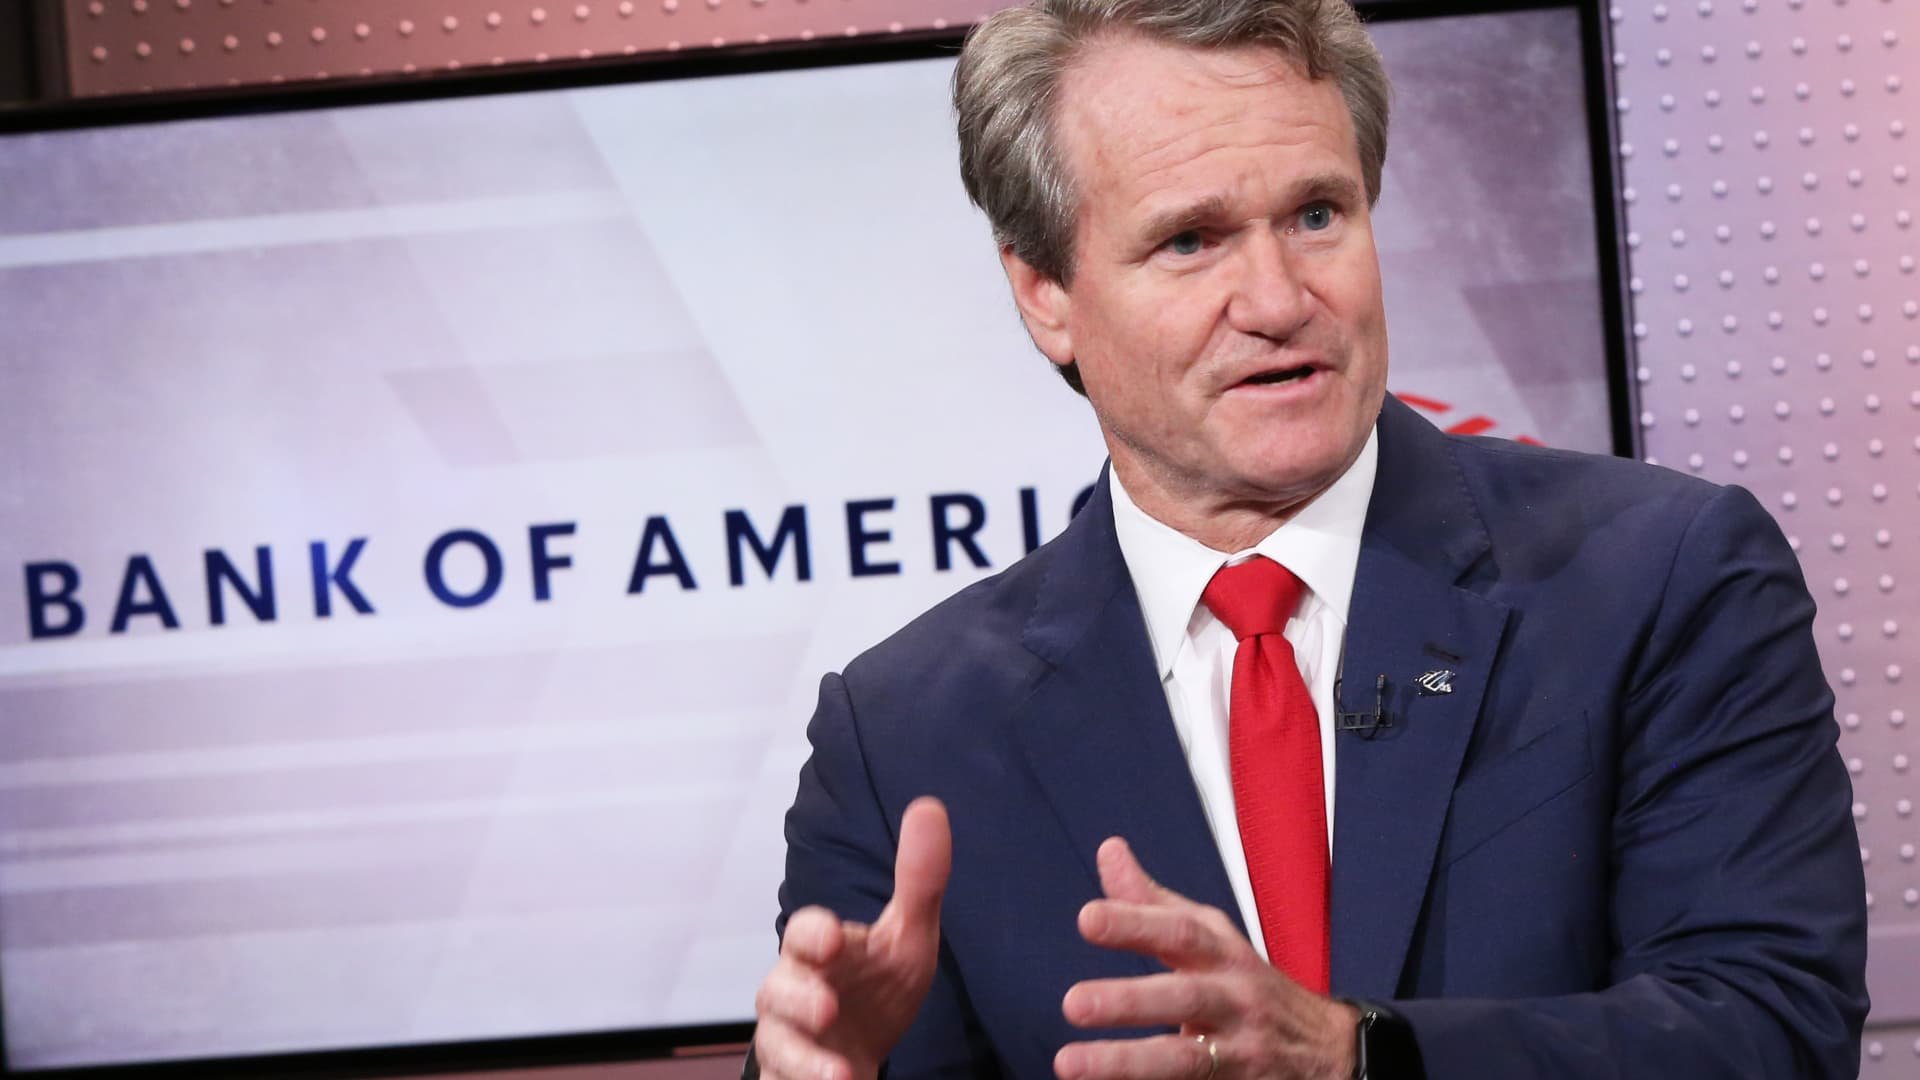 Bank of America CEO details back-to-office plan, concentrating on Covid-vaccinated employees first